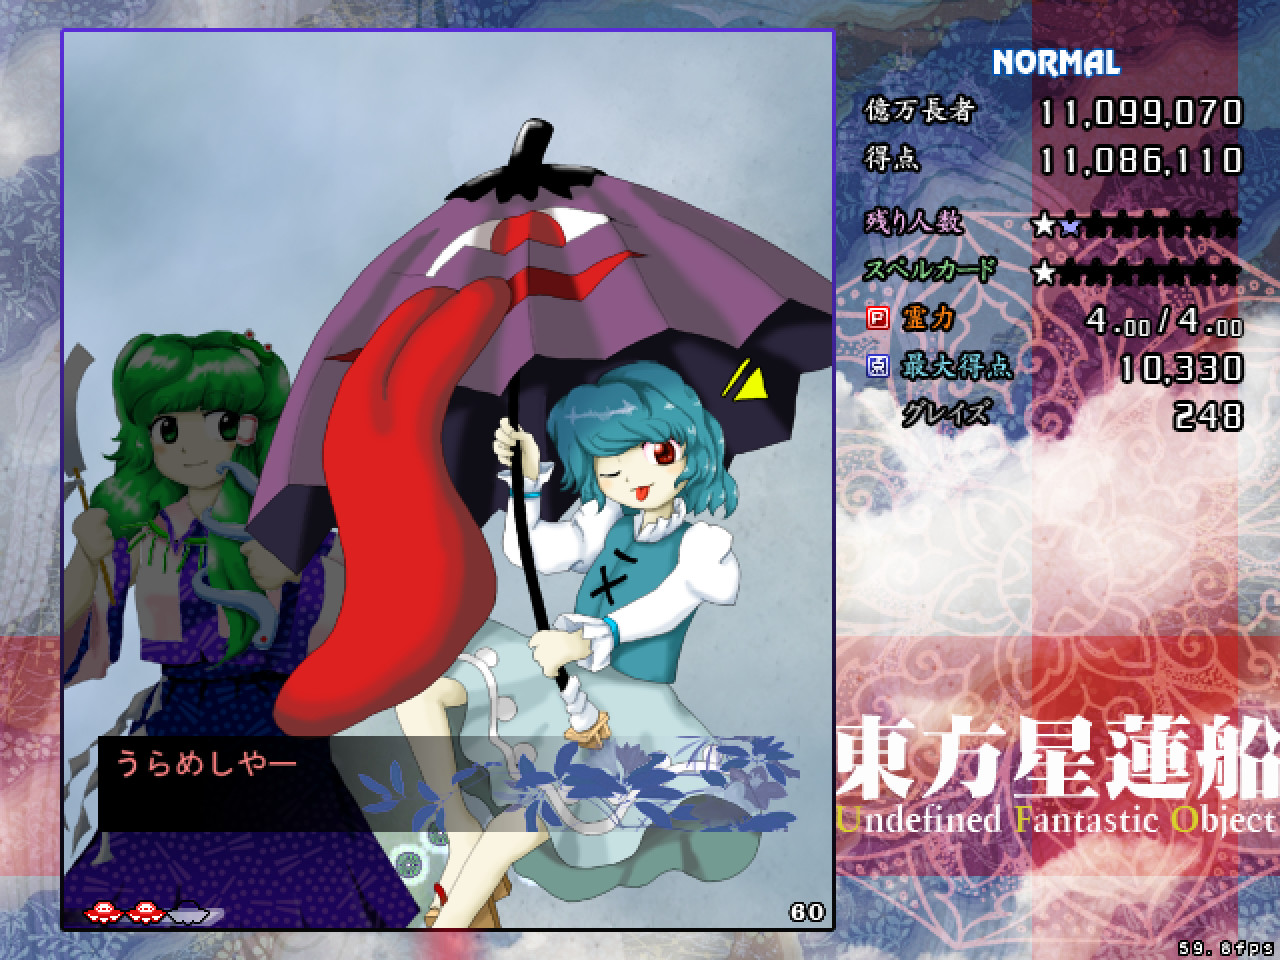 Touhou Seirensen ~ Undefined Fantastic Object.